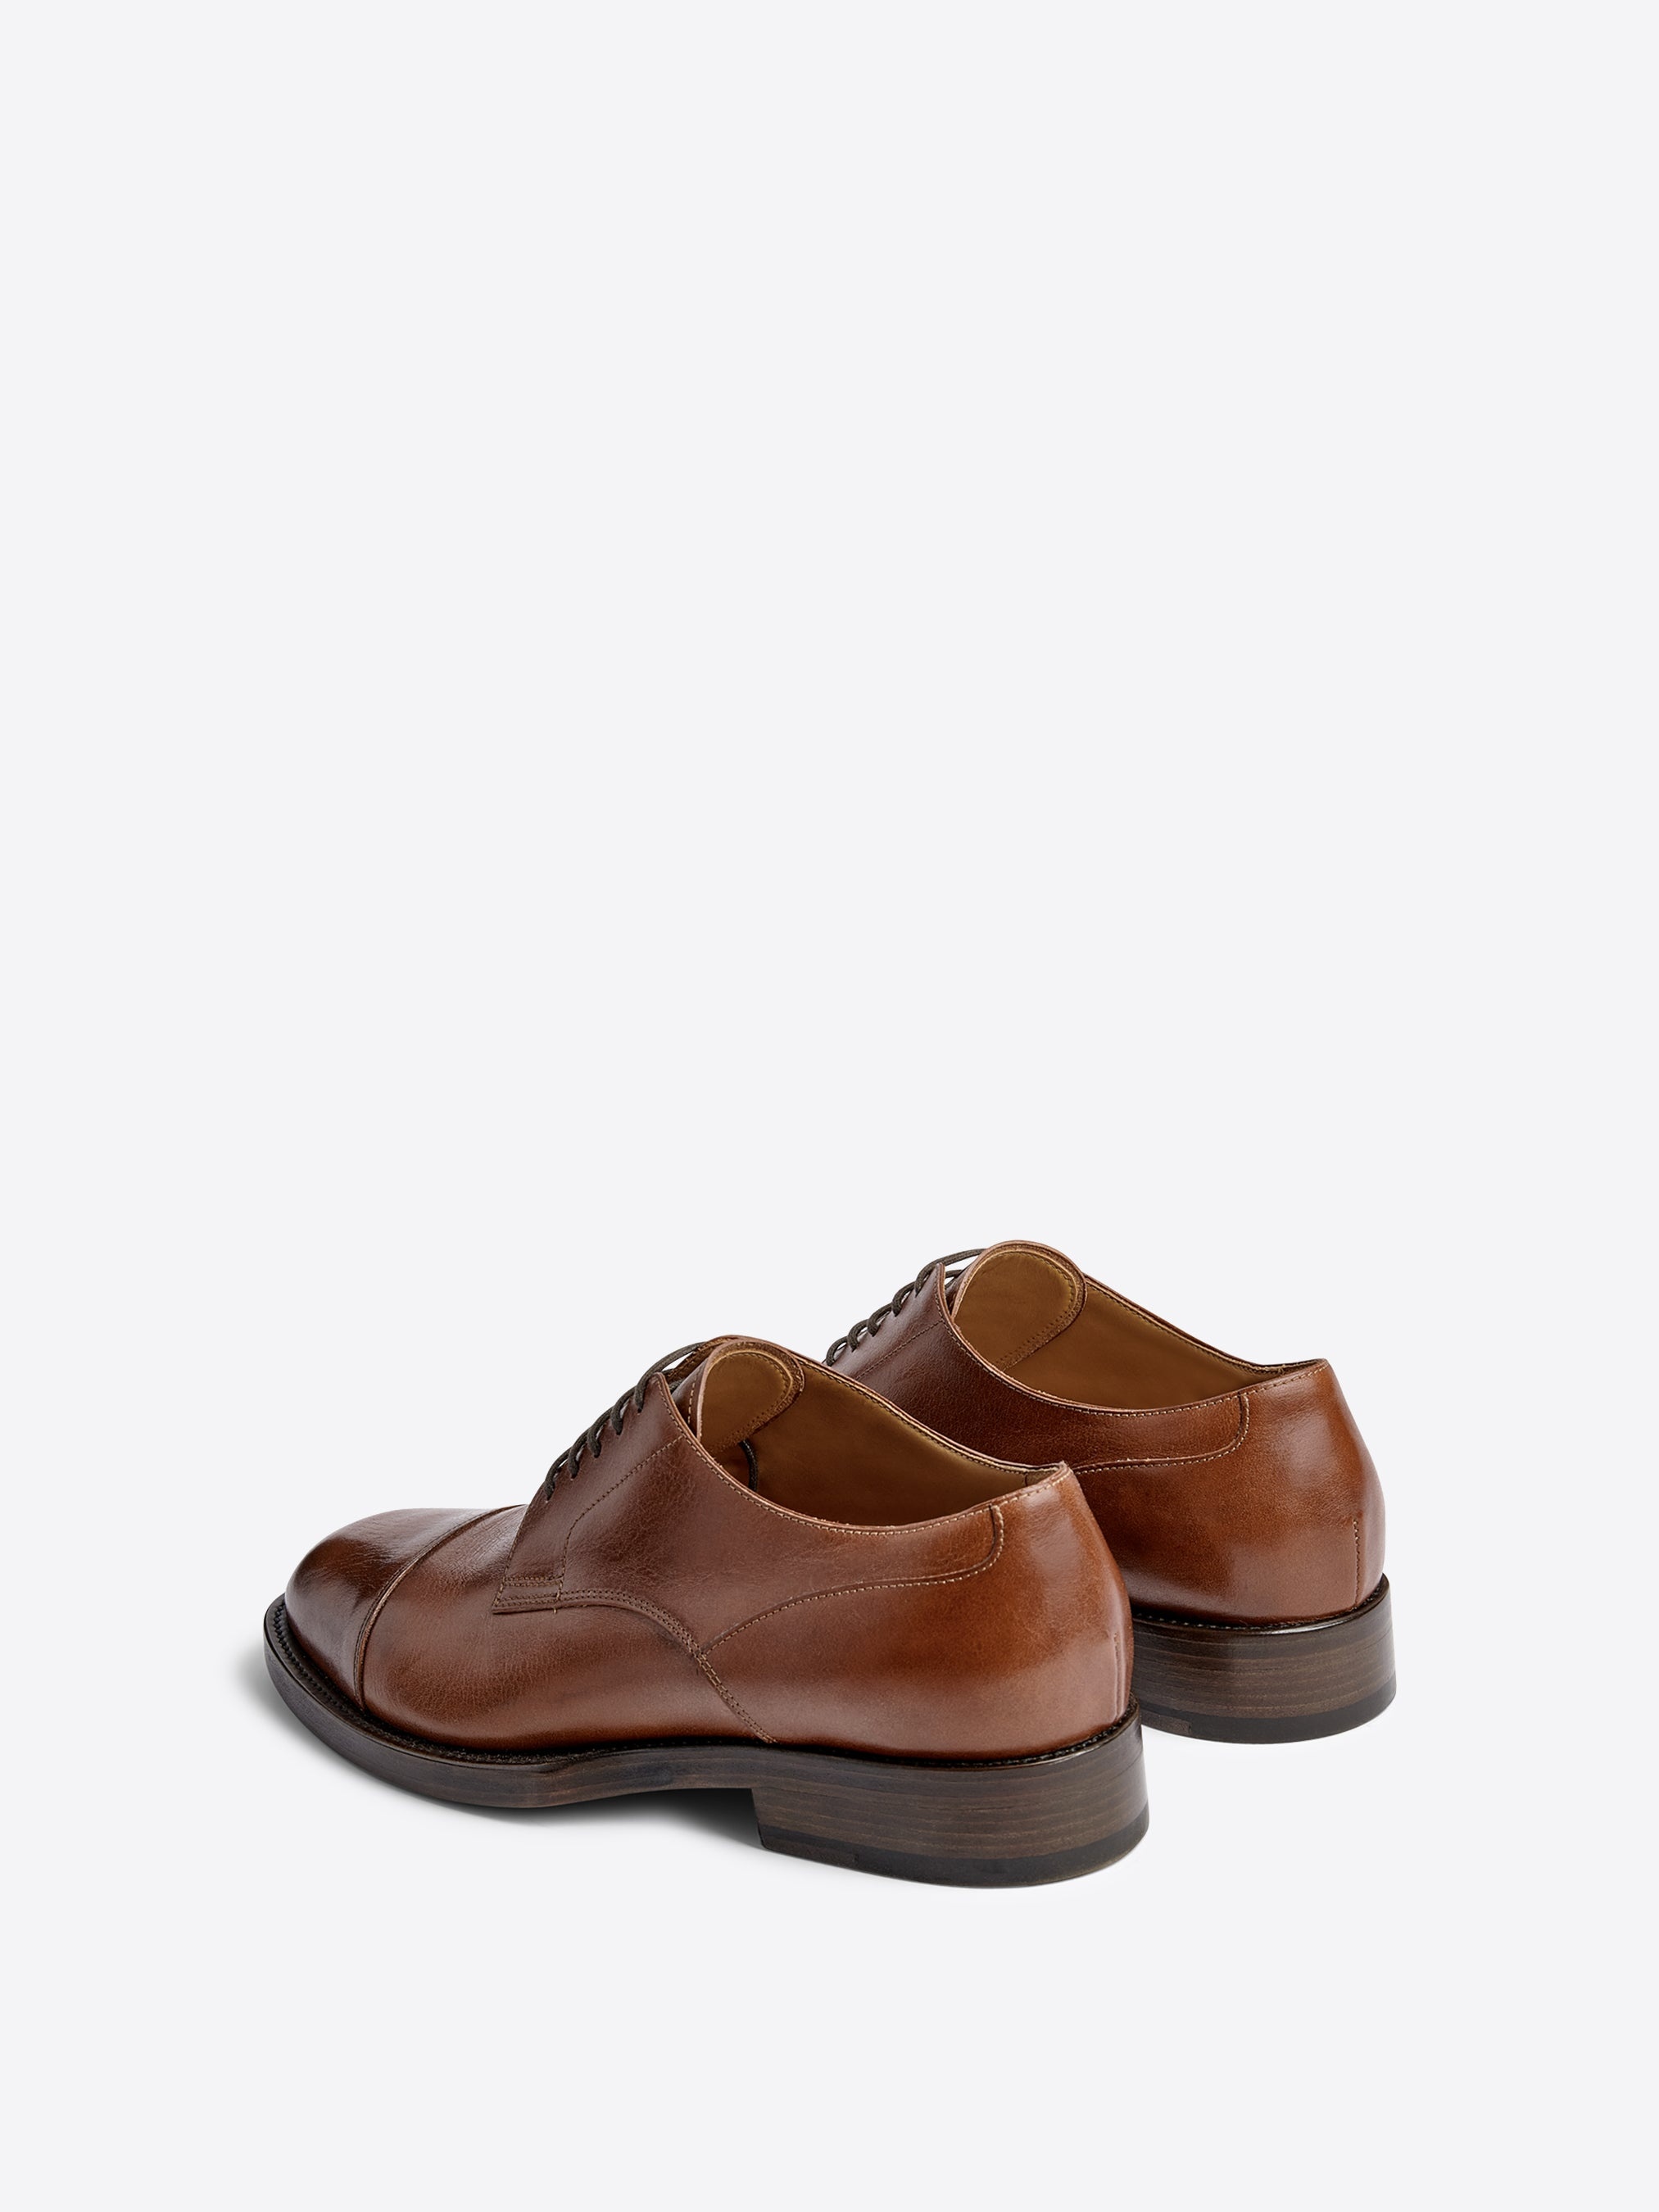 LEATHER DERBY SHOES - 4